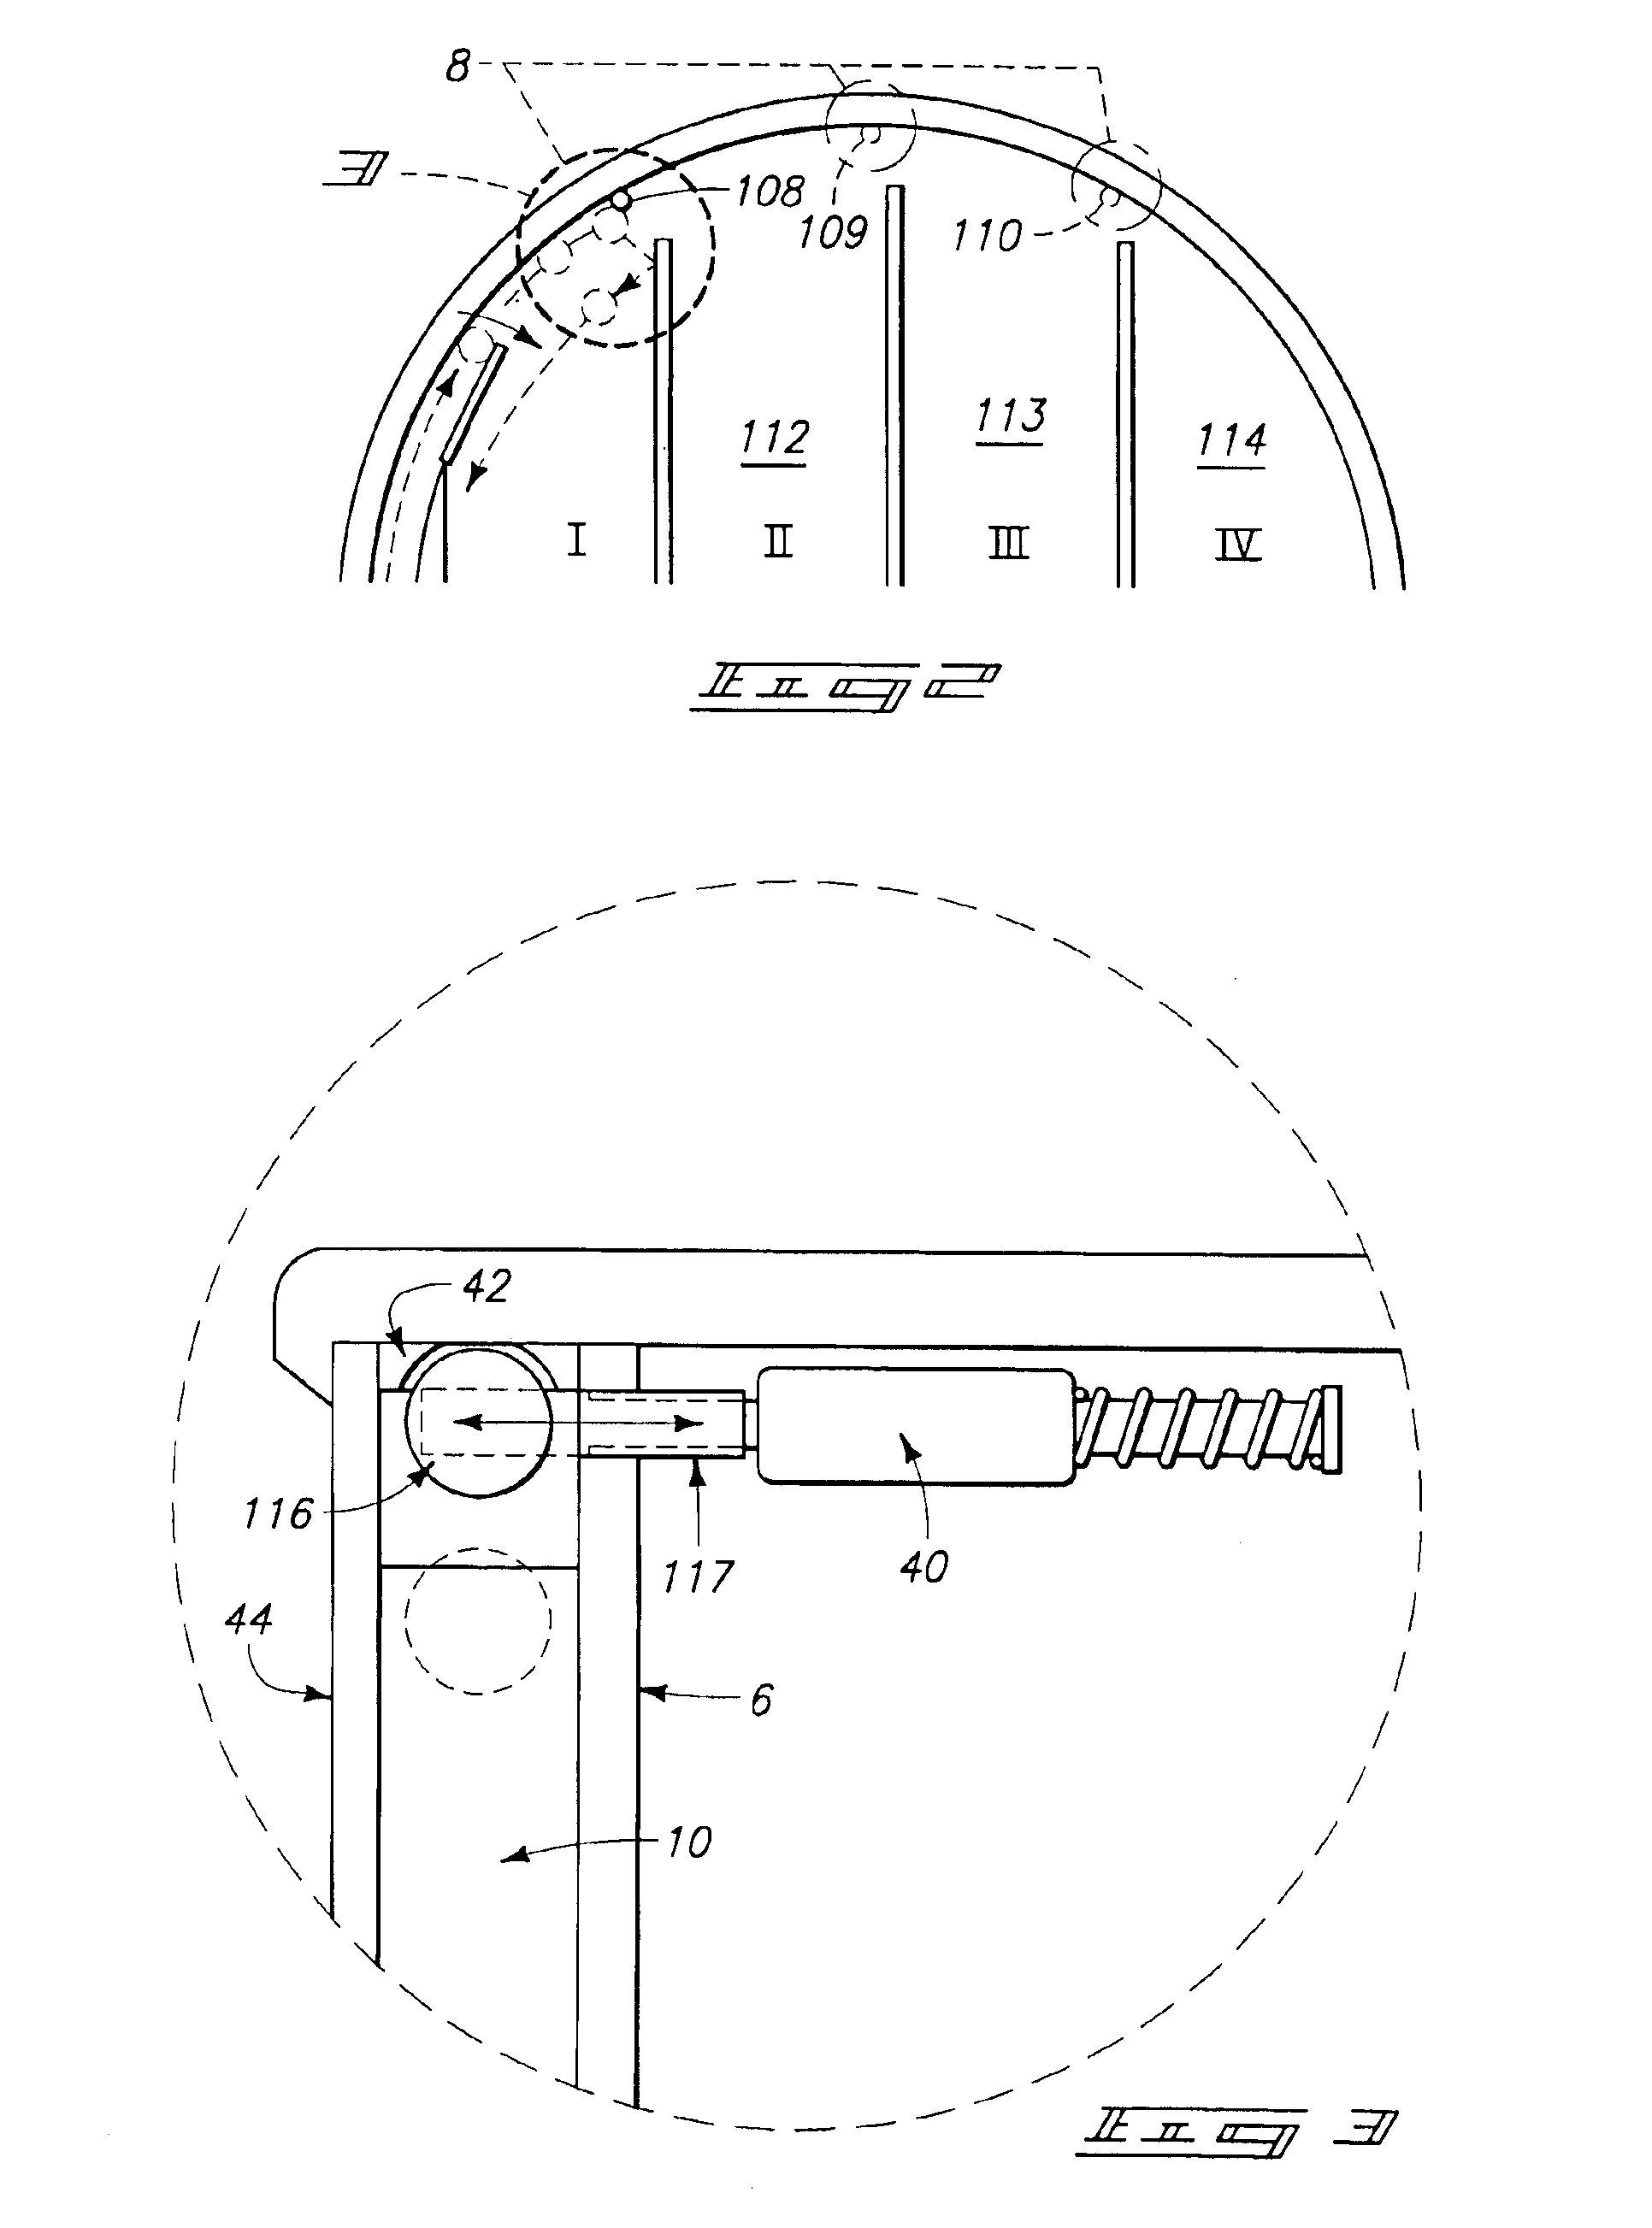 Slot-type gaming machine with variable drop zone symbols